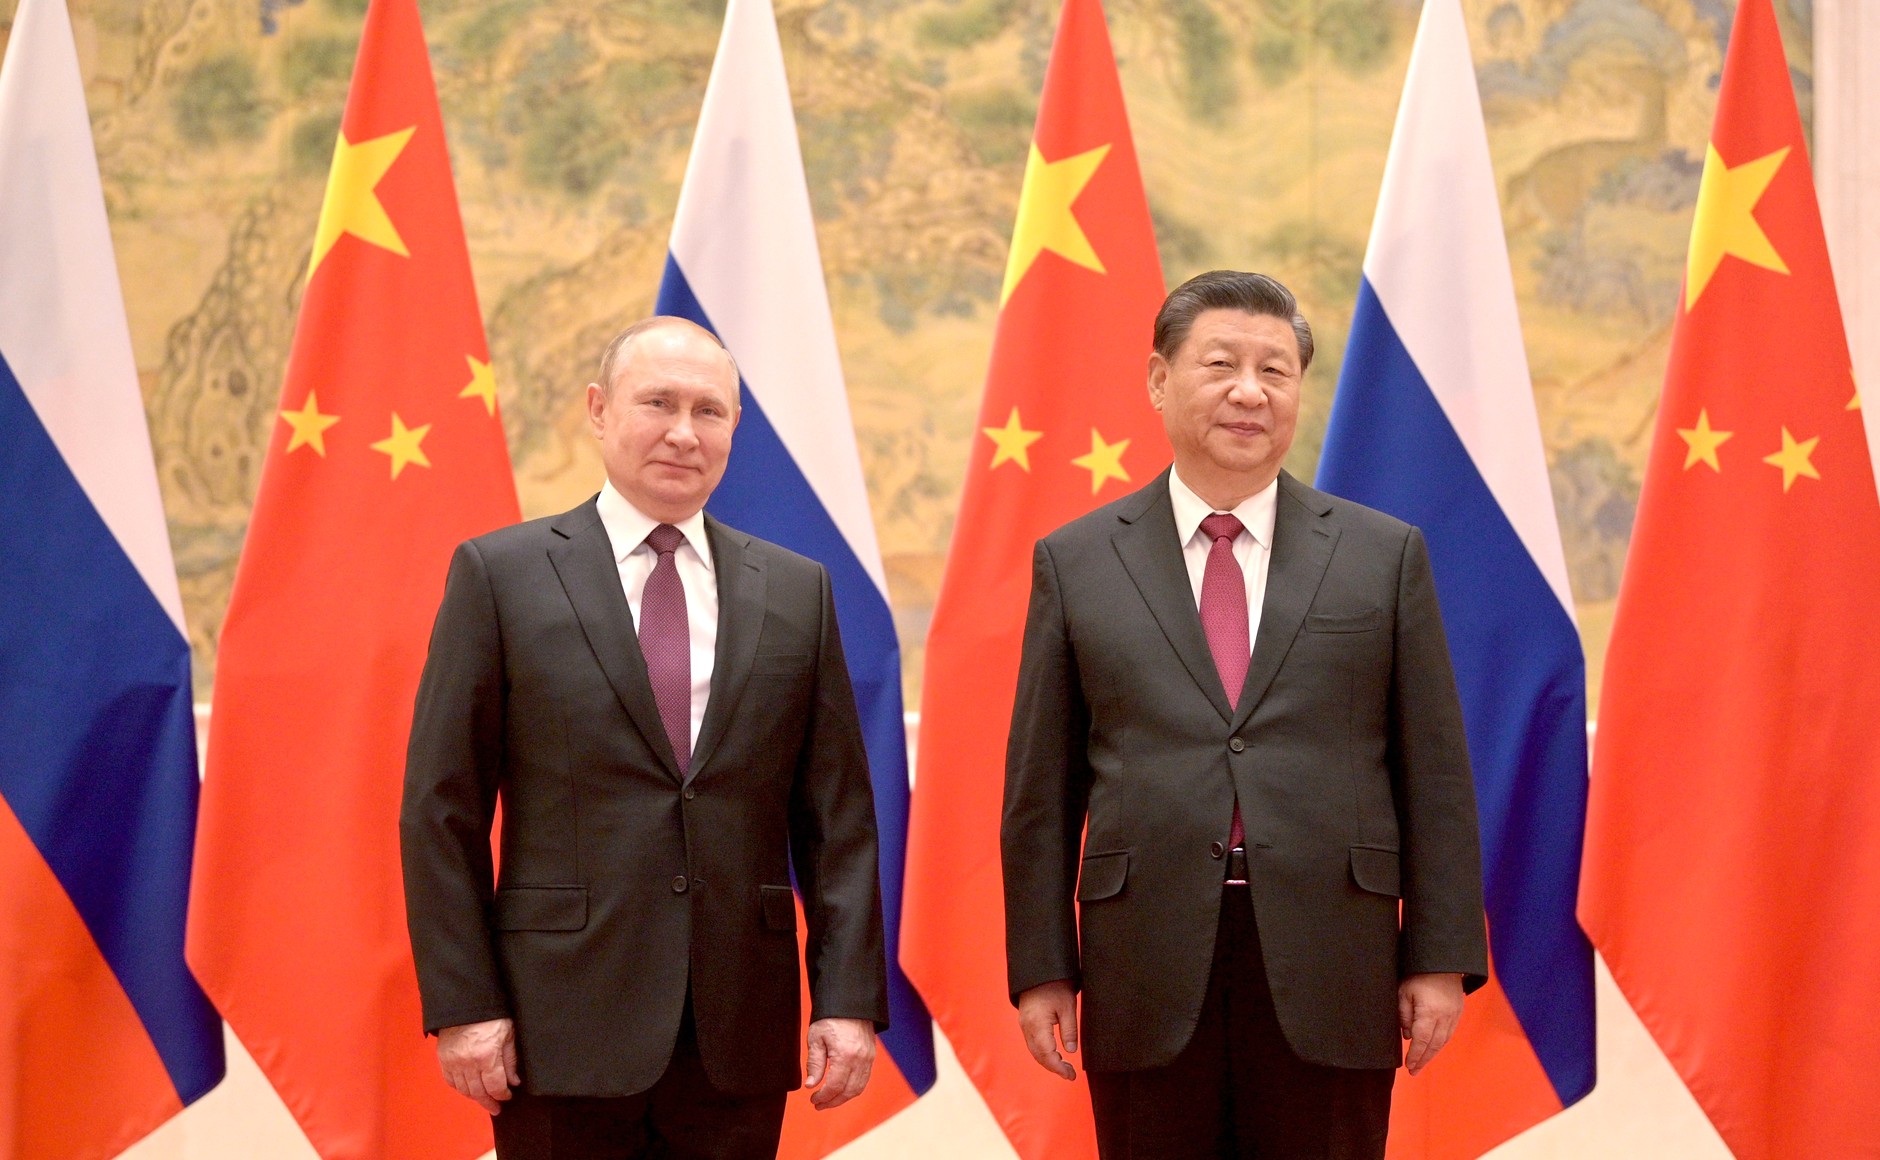 How the United States Can Use Trade Policy to Prevent a New Sino-Russian Alliance